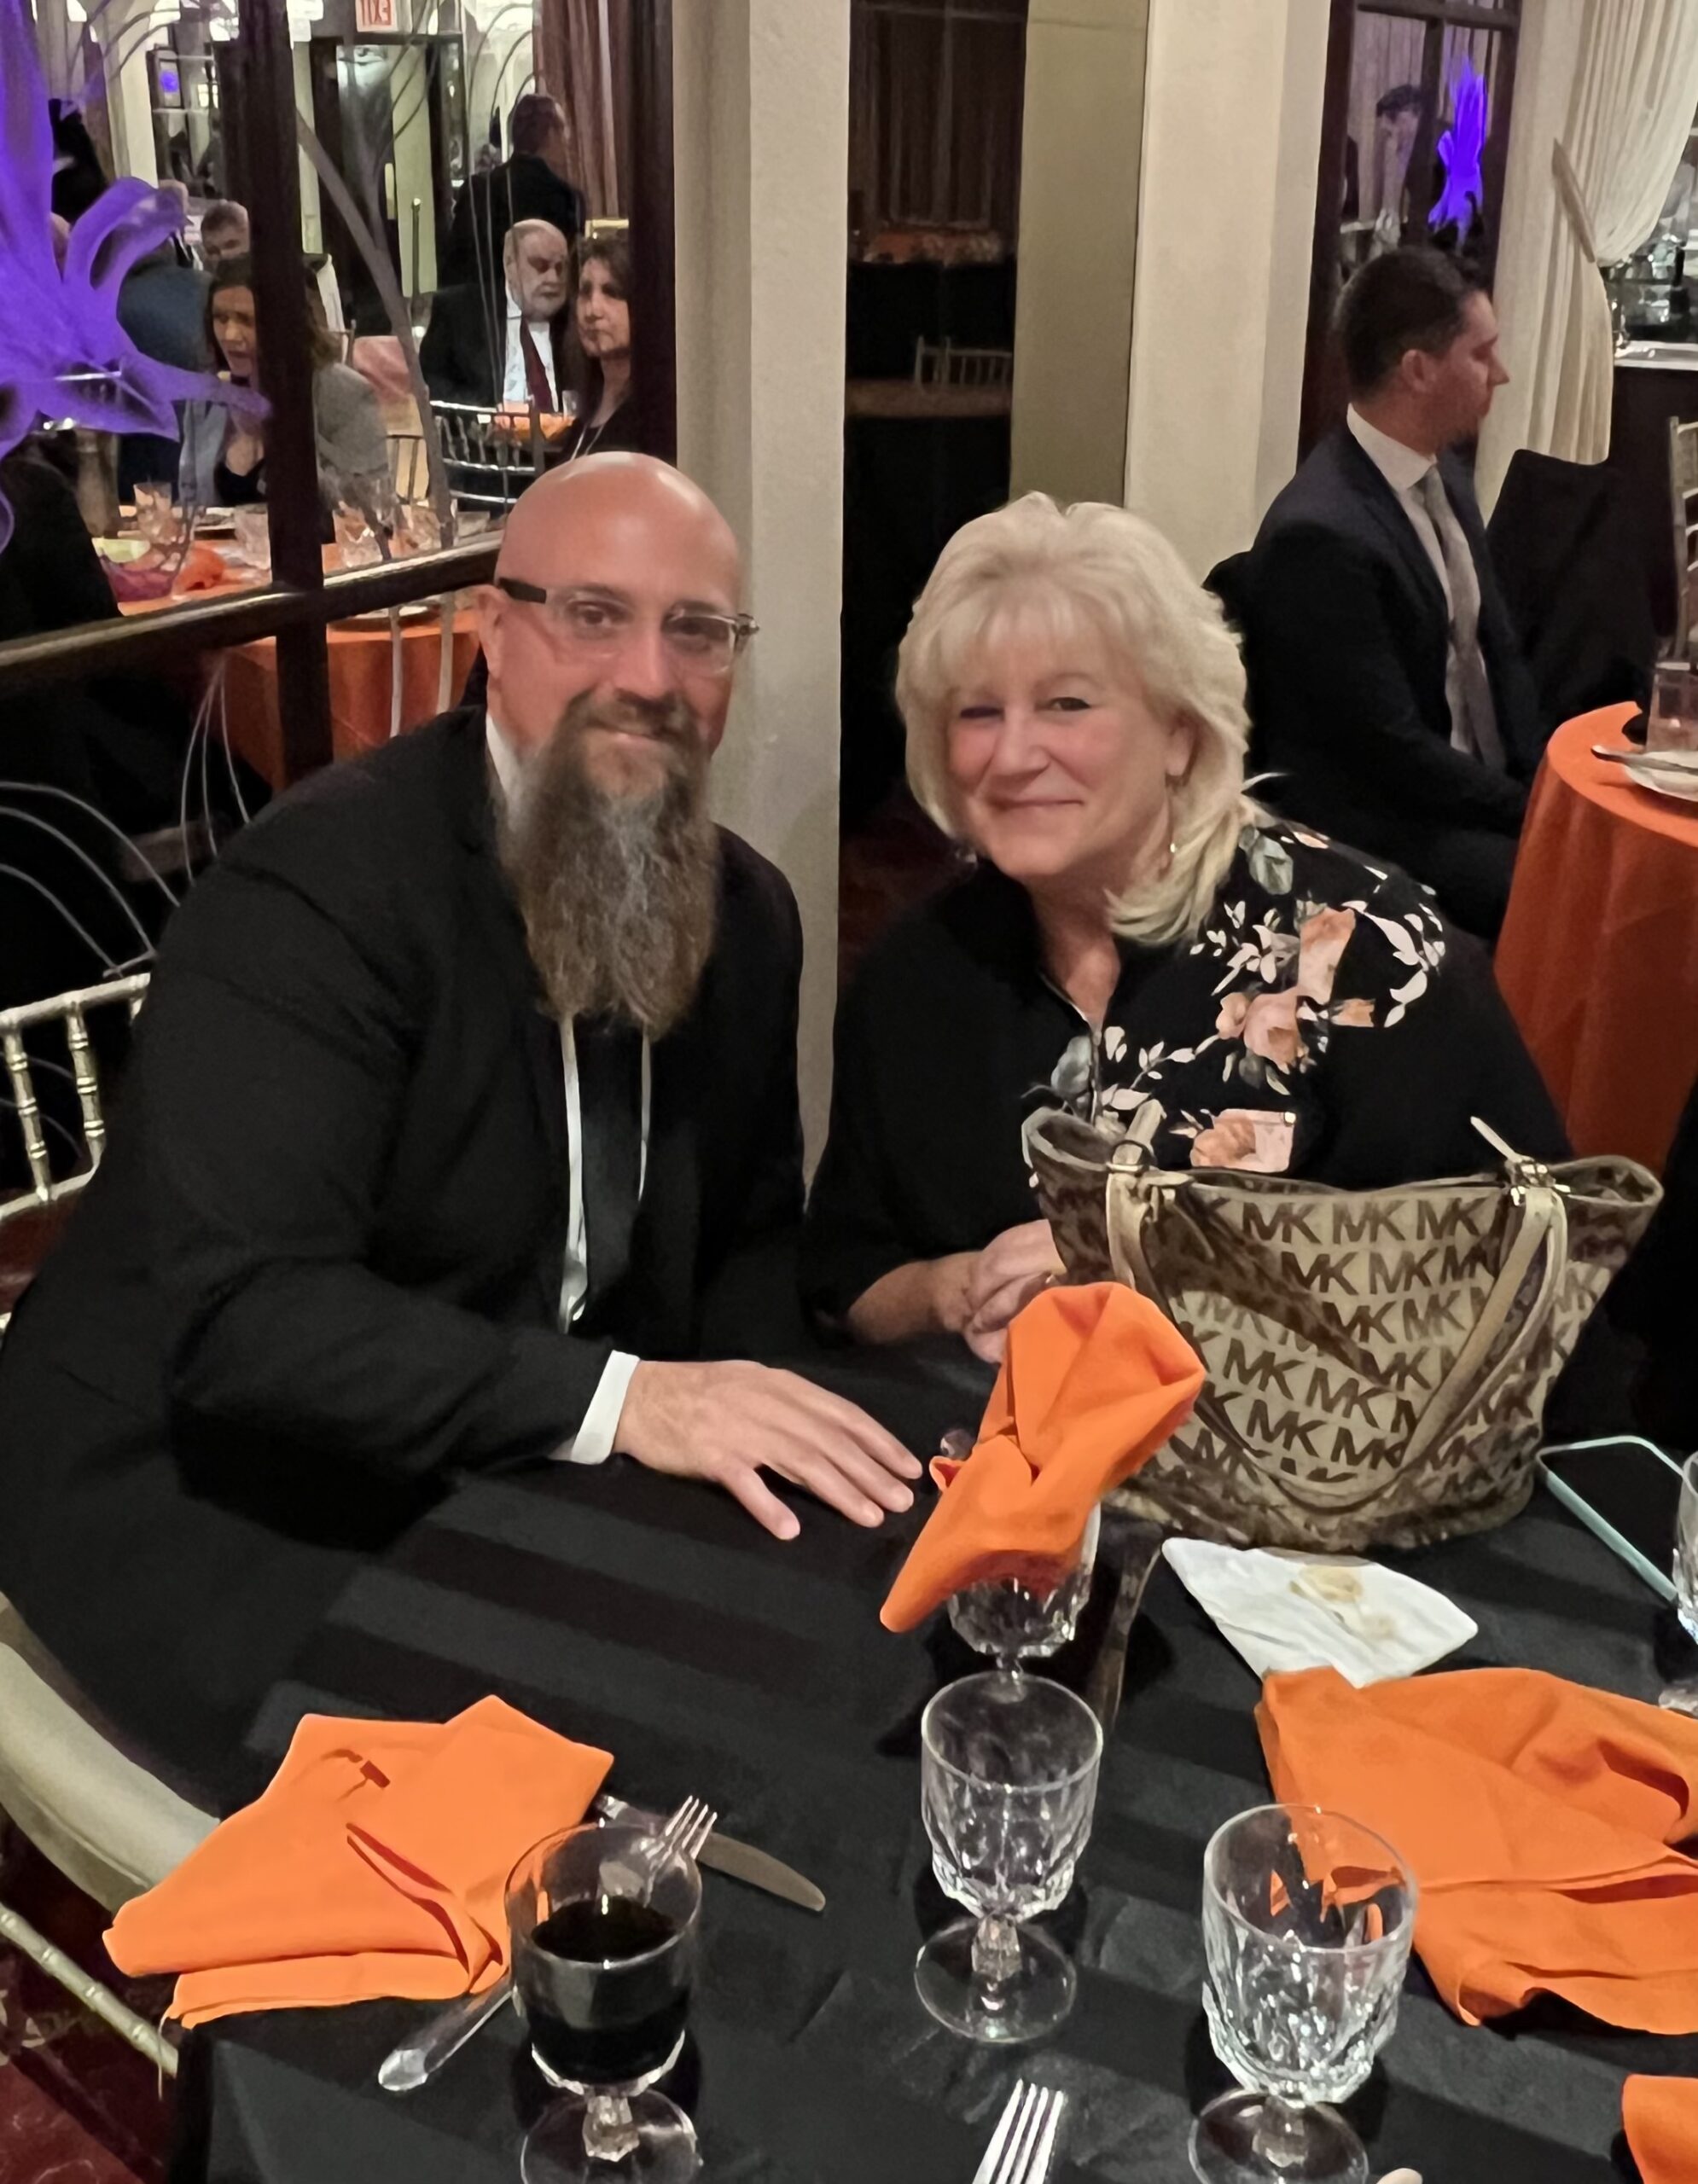 (from left) Attorney Justin Daley; and Arlene Rutuelo, Norwegian Christian Home and Health Center vice chairwoman, Board of Directors at KCCP Annual Reception.